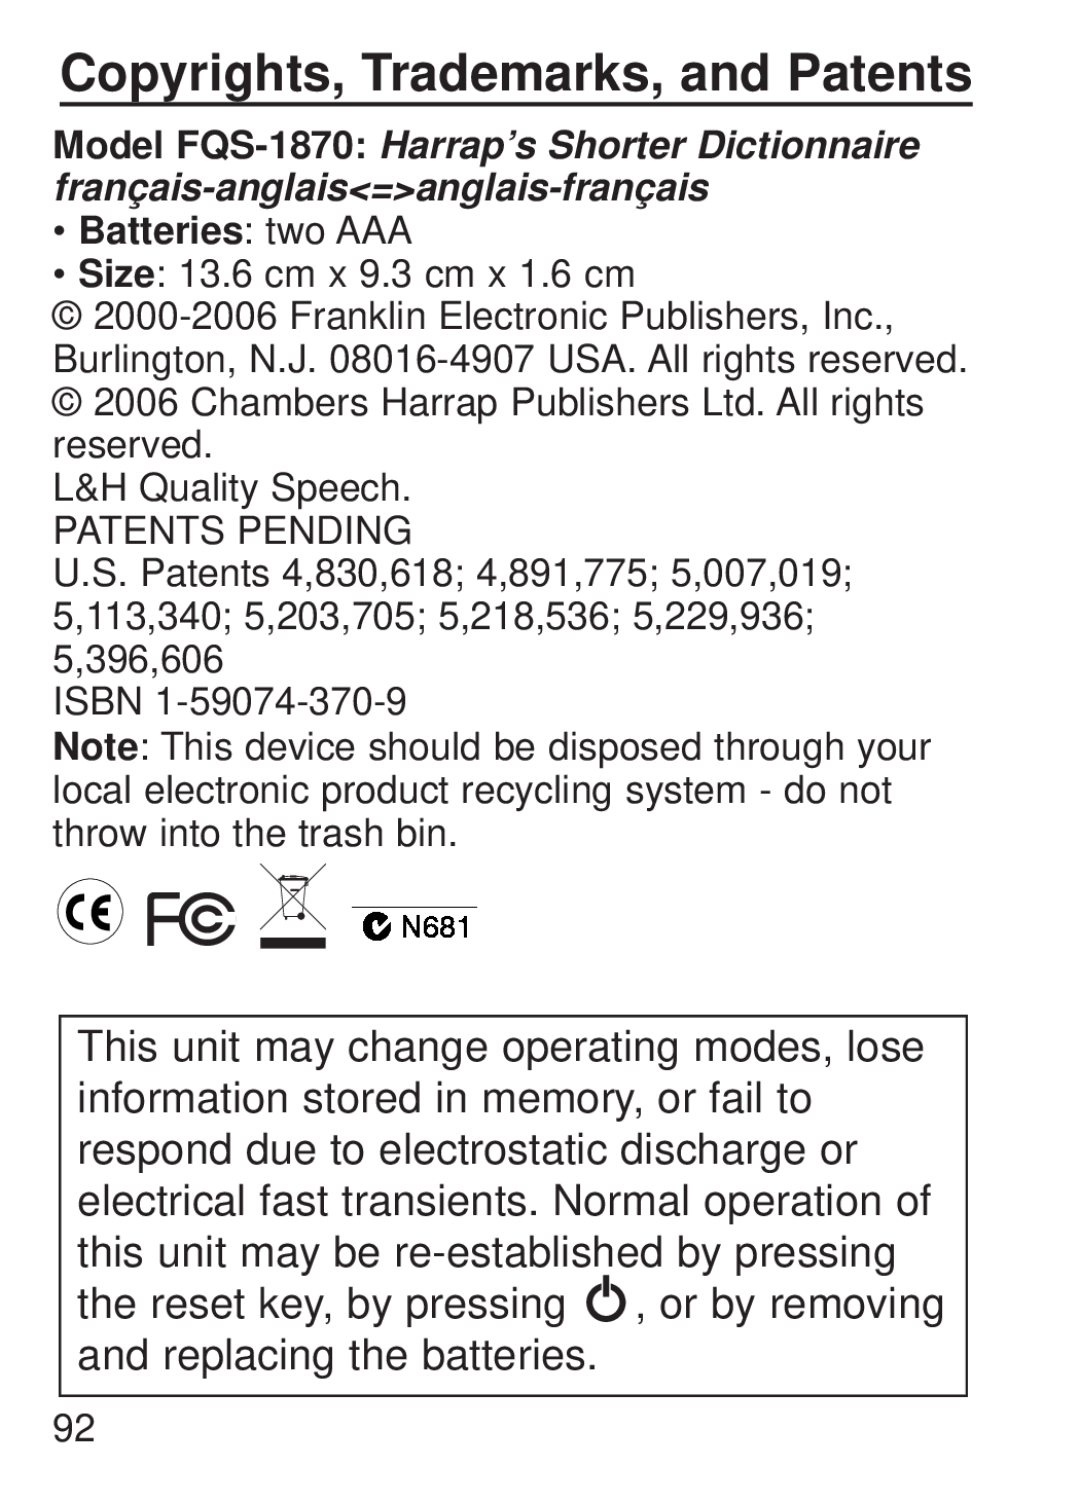 Franklin FQS-1870 manual Copyrights, Trademarks, and Patents, •Batteries: two AAA 